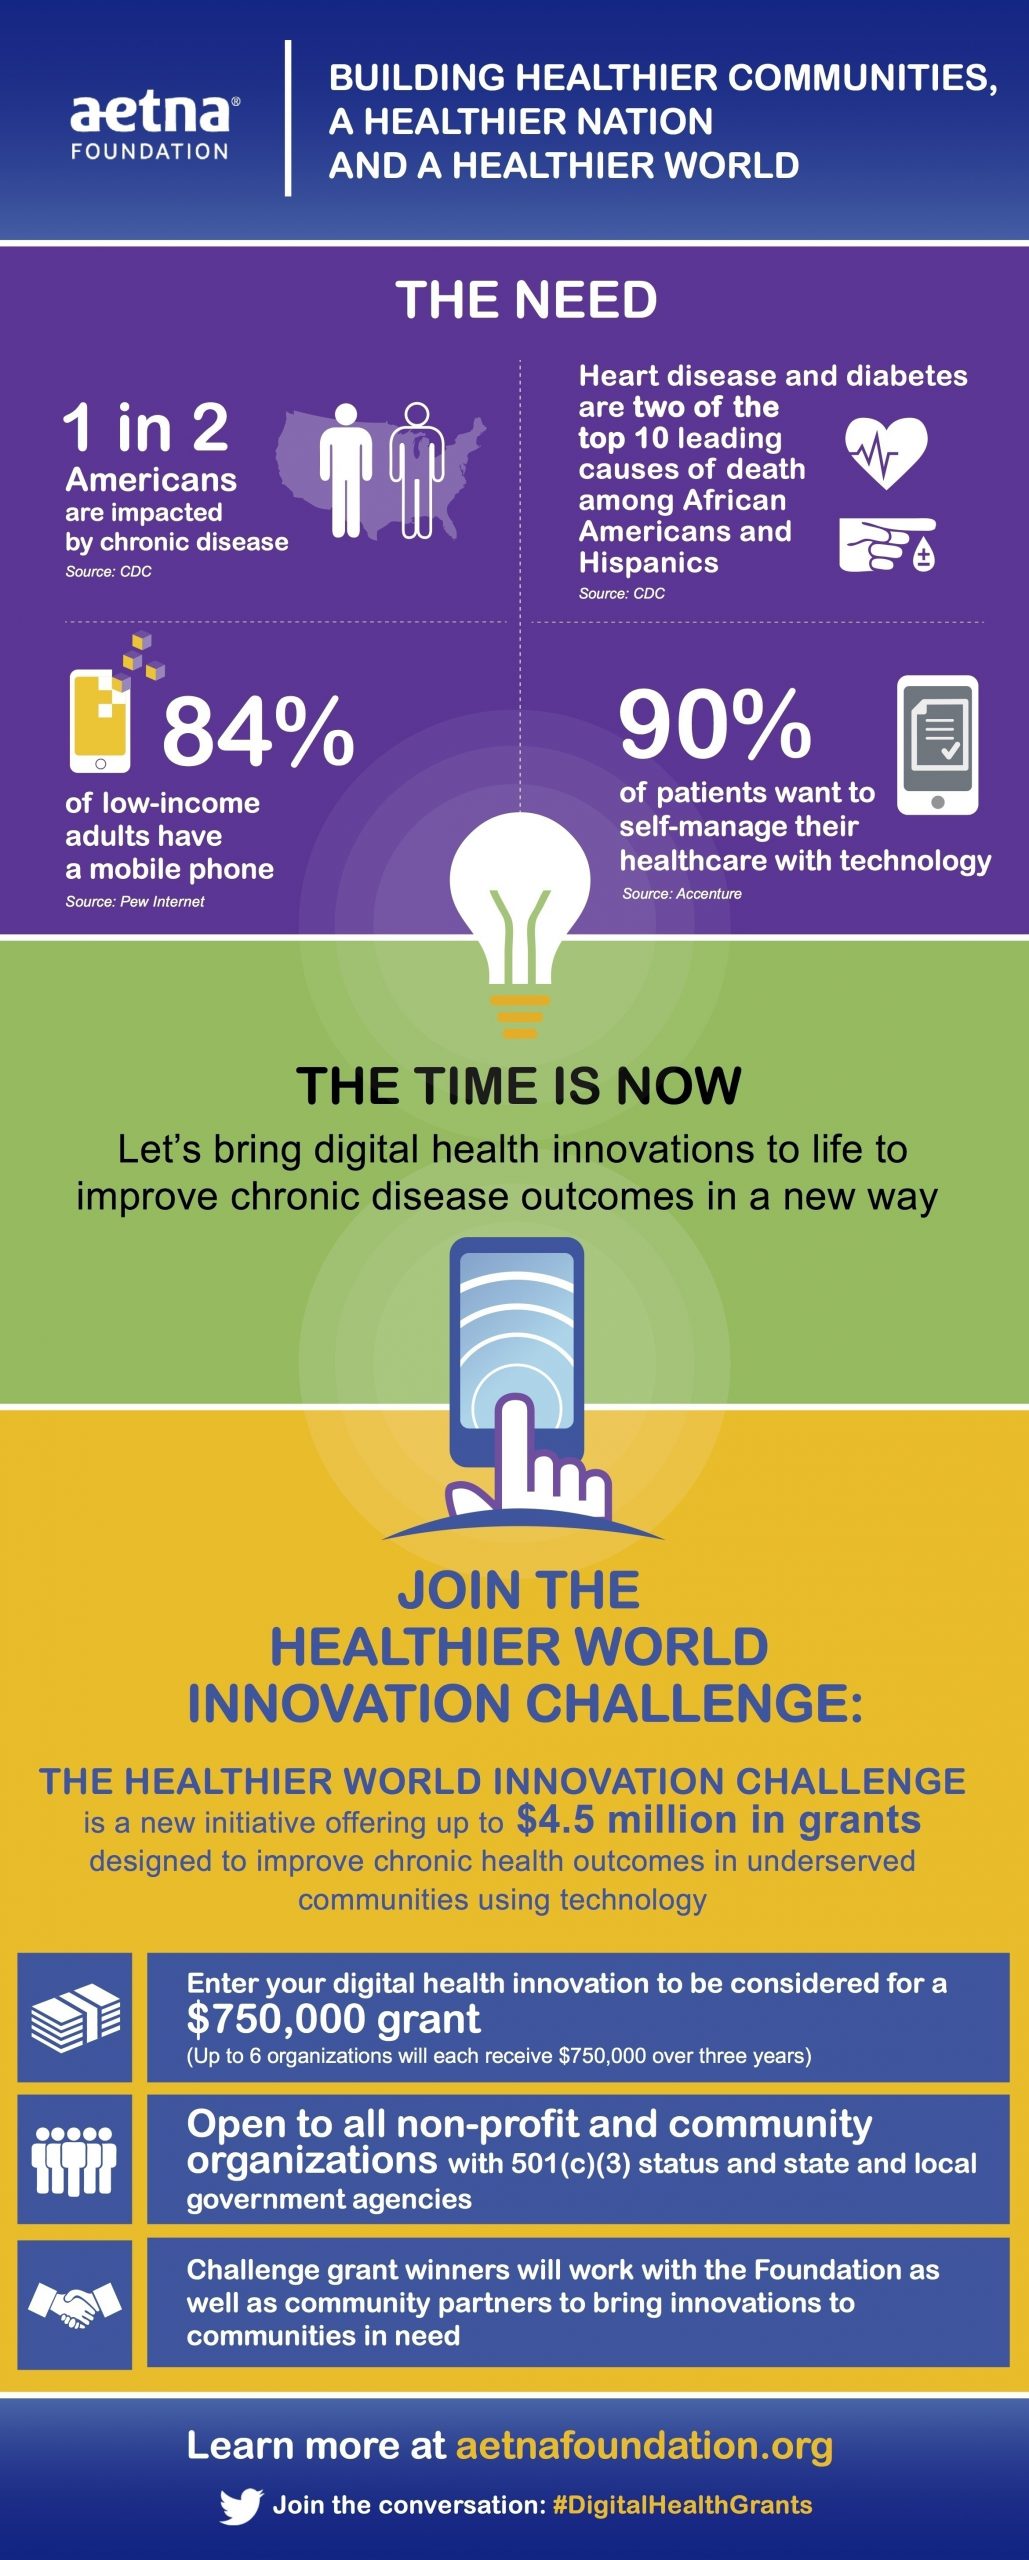 Aetna_foundation_healthier_world_innovation_challenge_infographic_final